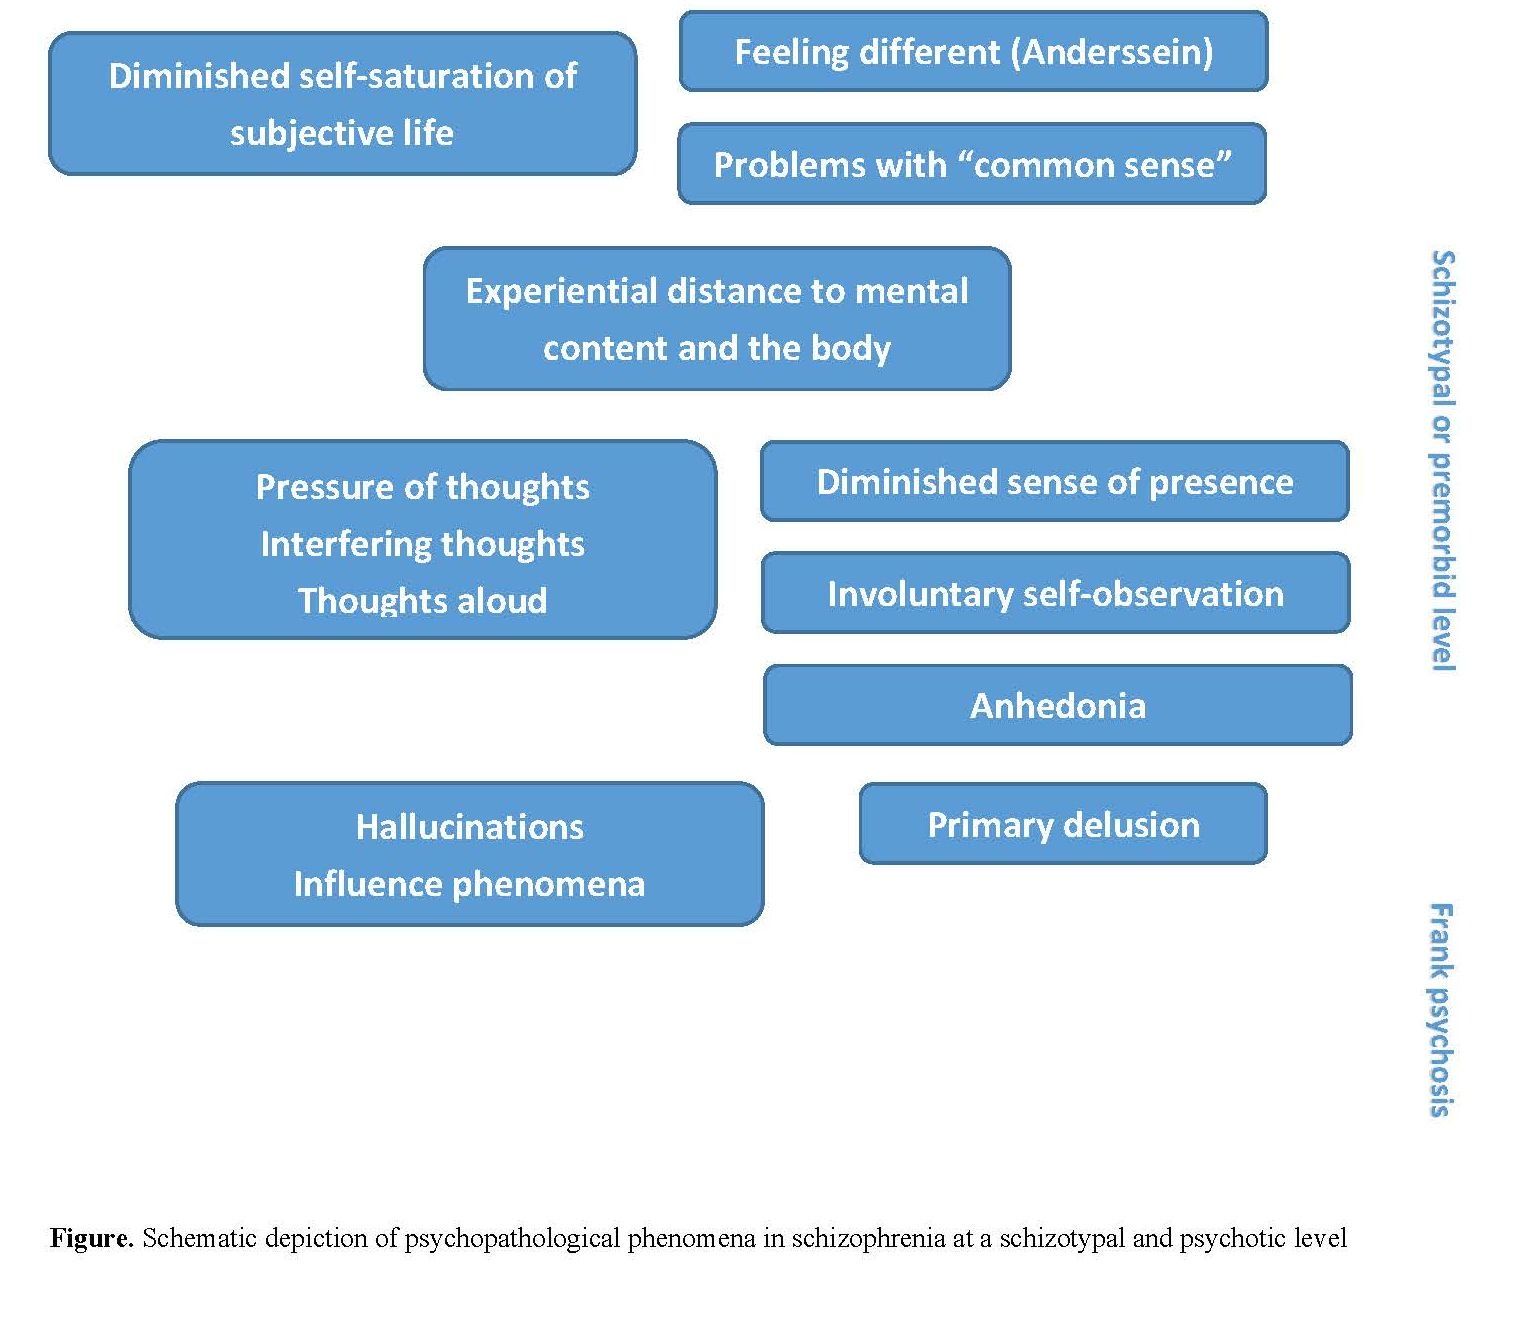 Schematic depiction of psychopathological phenomena in schizophrenia at a schizotypal and psychotic level 